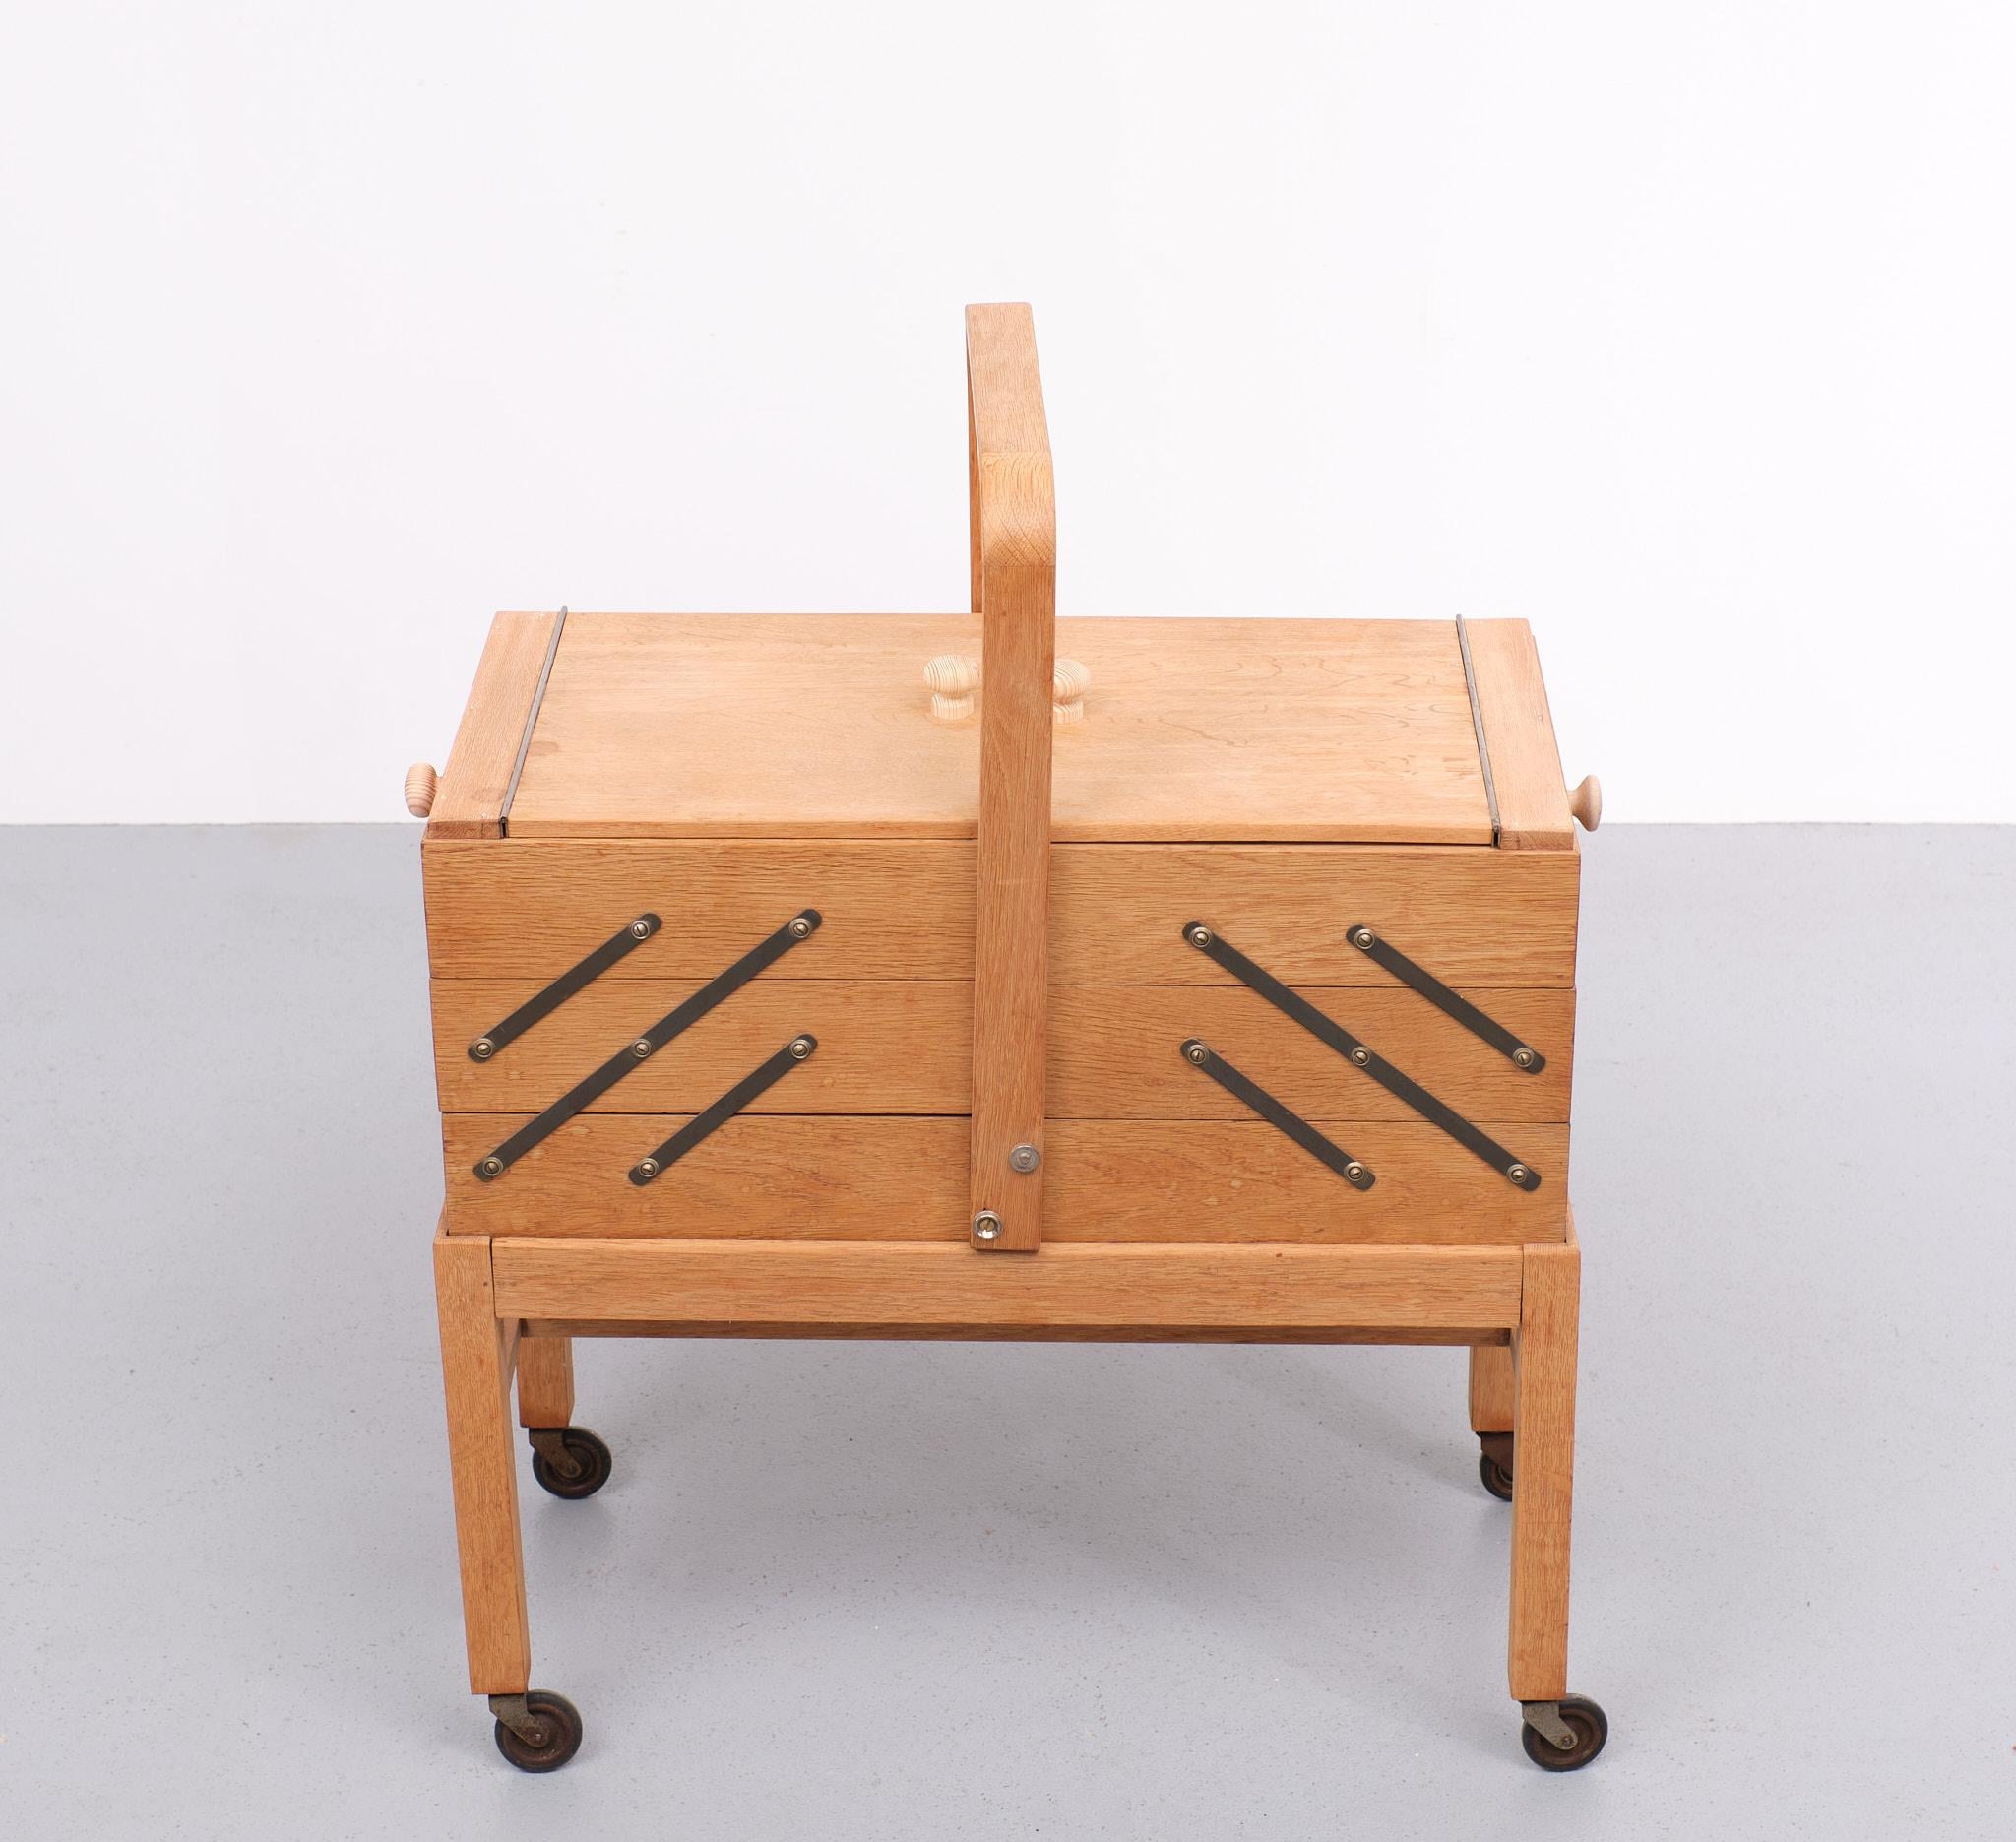 Large Solid Oak wood sewing box ,on wheels . opened with two hinged doors on the top, while the accordion style (with layered shelves that used external hinges to store more stuff in a compact space) Useful for serious sewers or other hobby's or